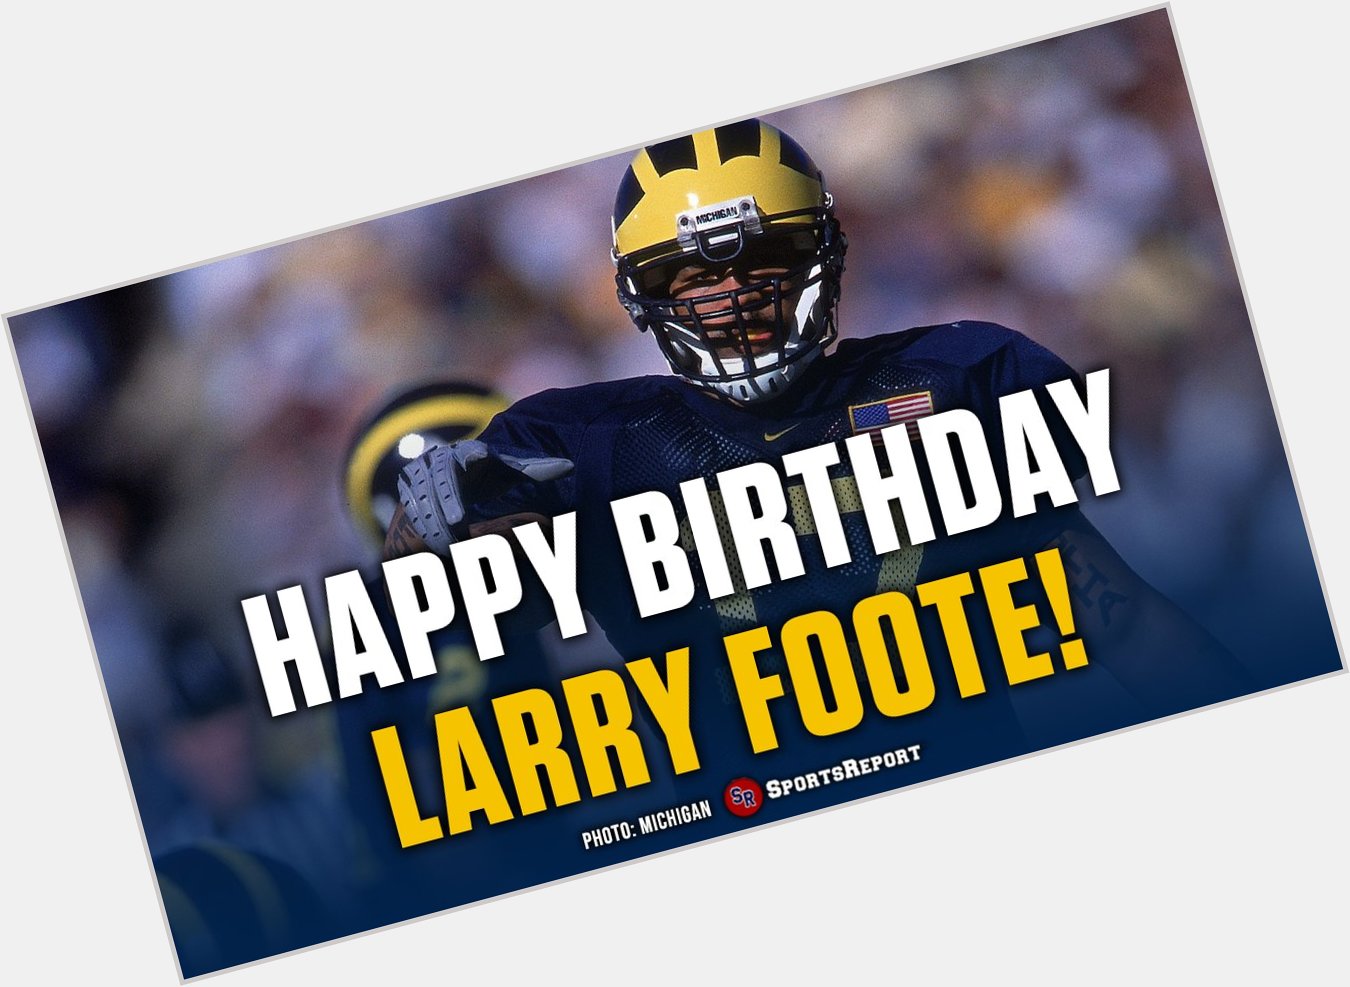  Fans, let\s wish legend Larry Foote a Happy Birthday! GO BLUE!! 